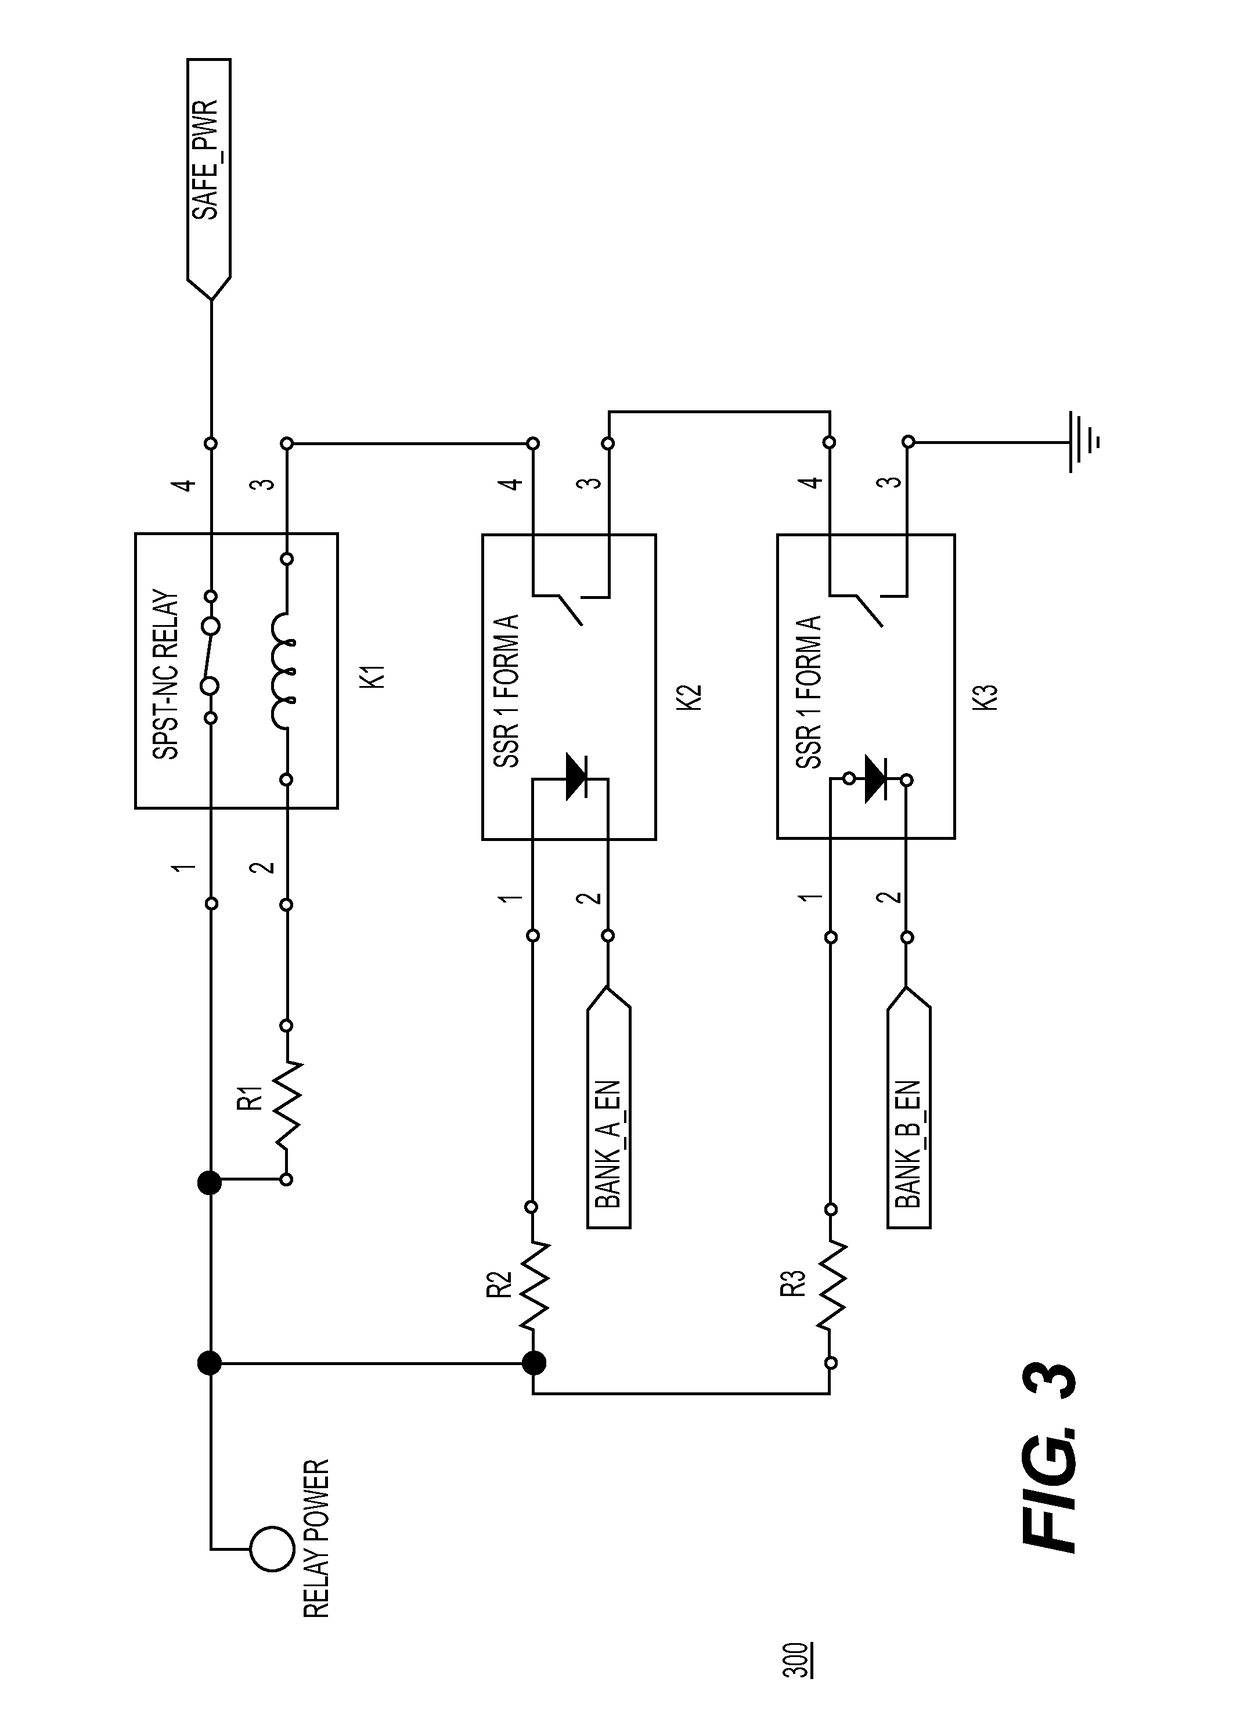 Modular multiplexing interface assembly for reducing semiconductor testing index time